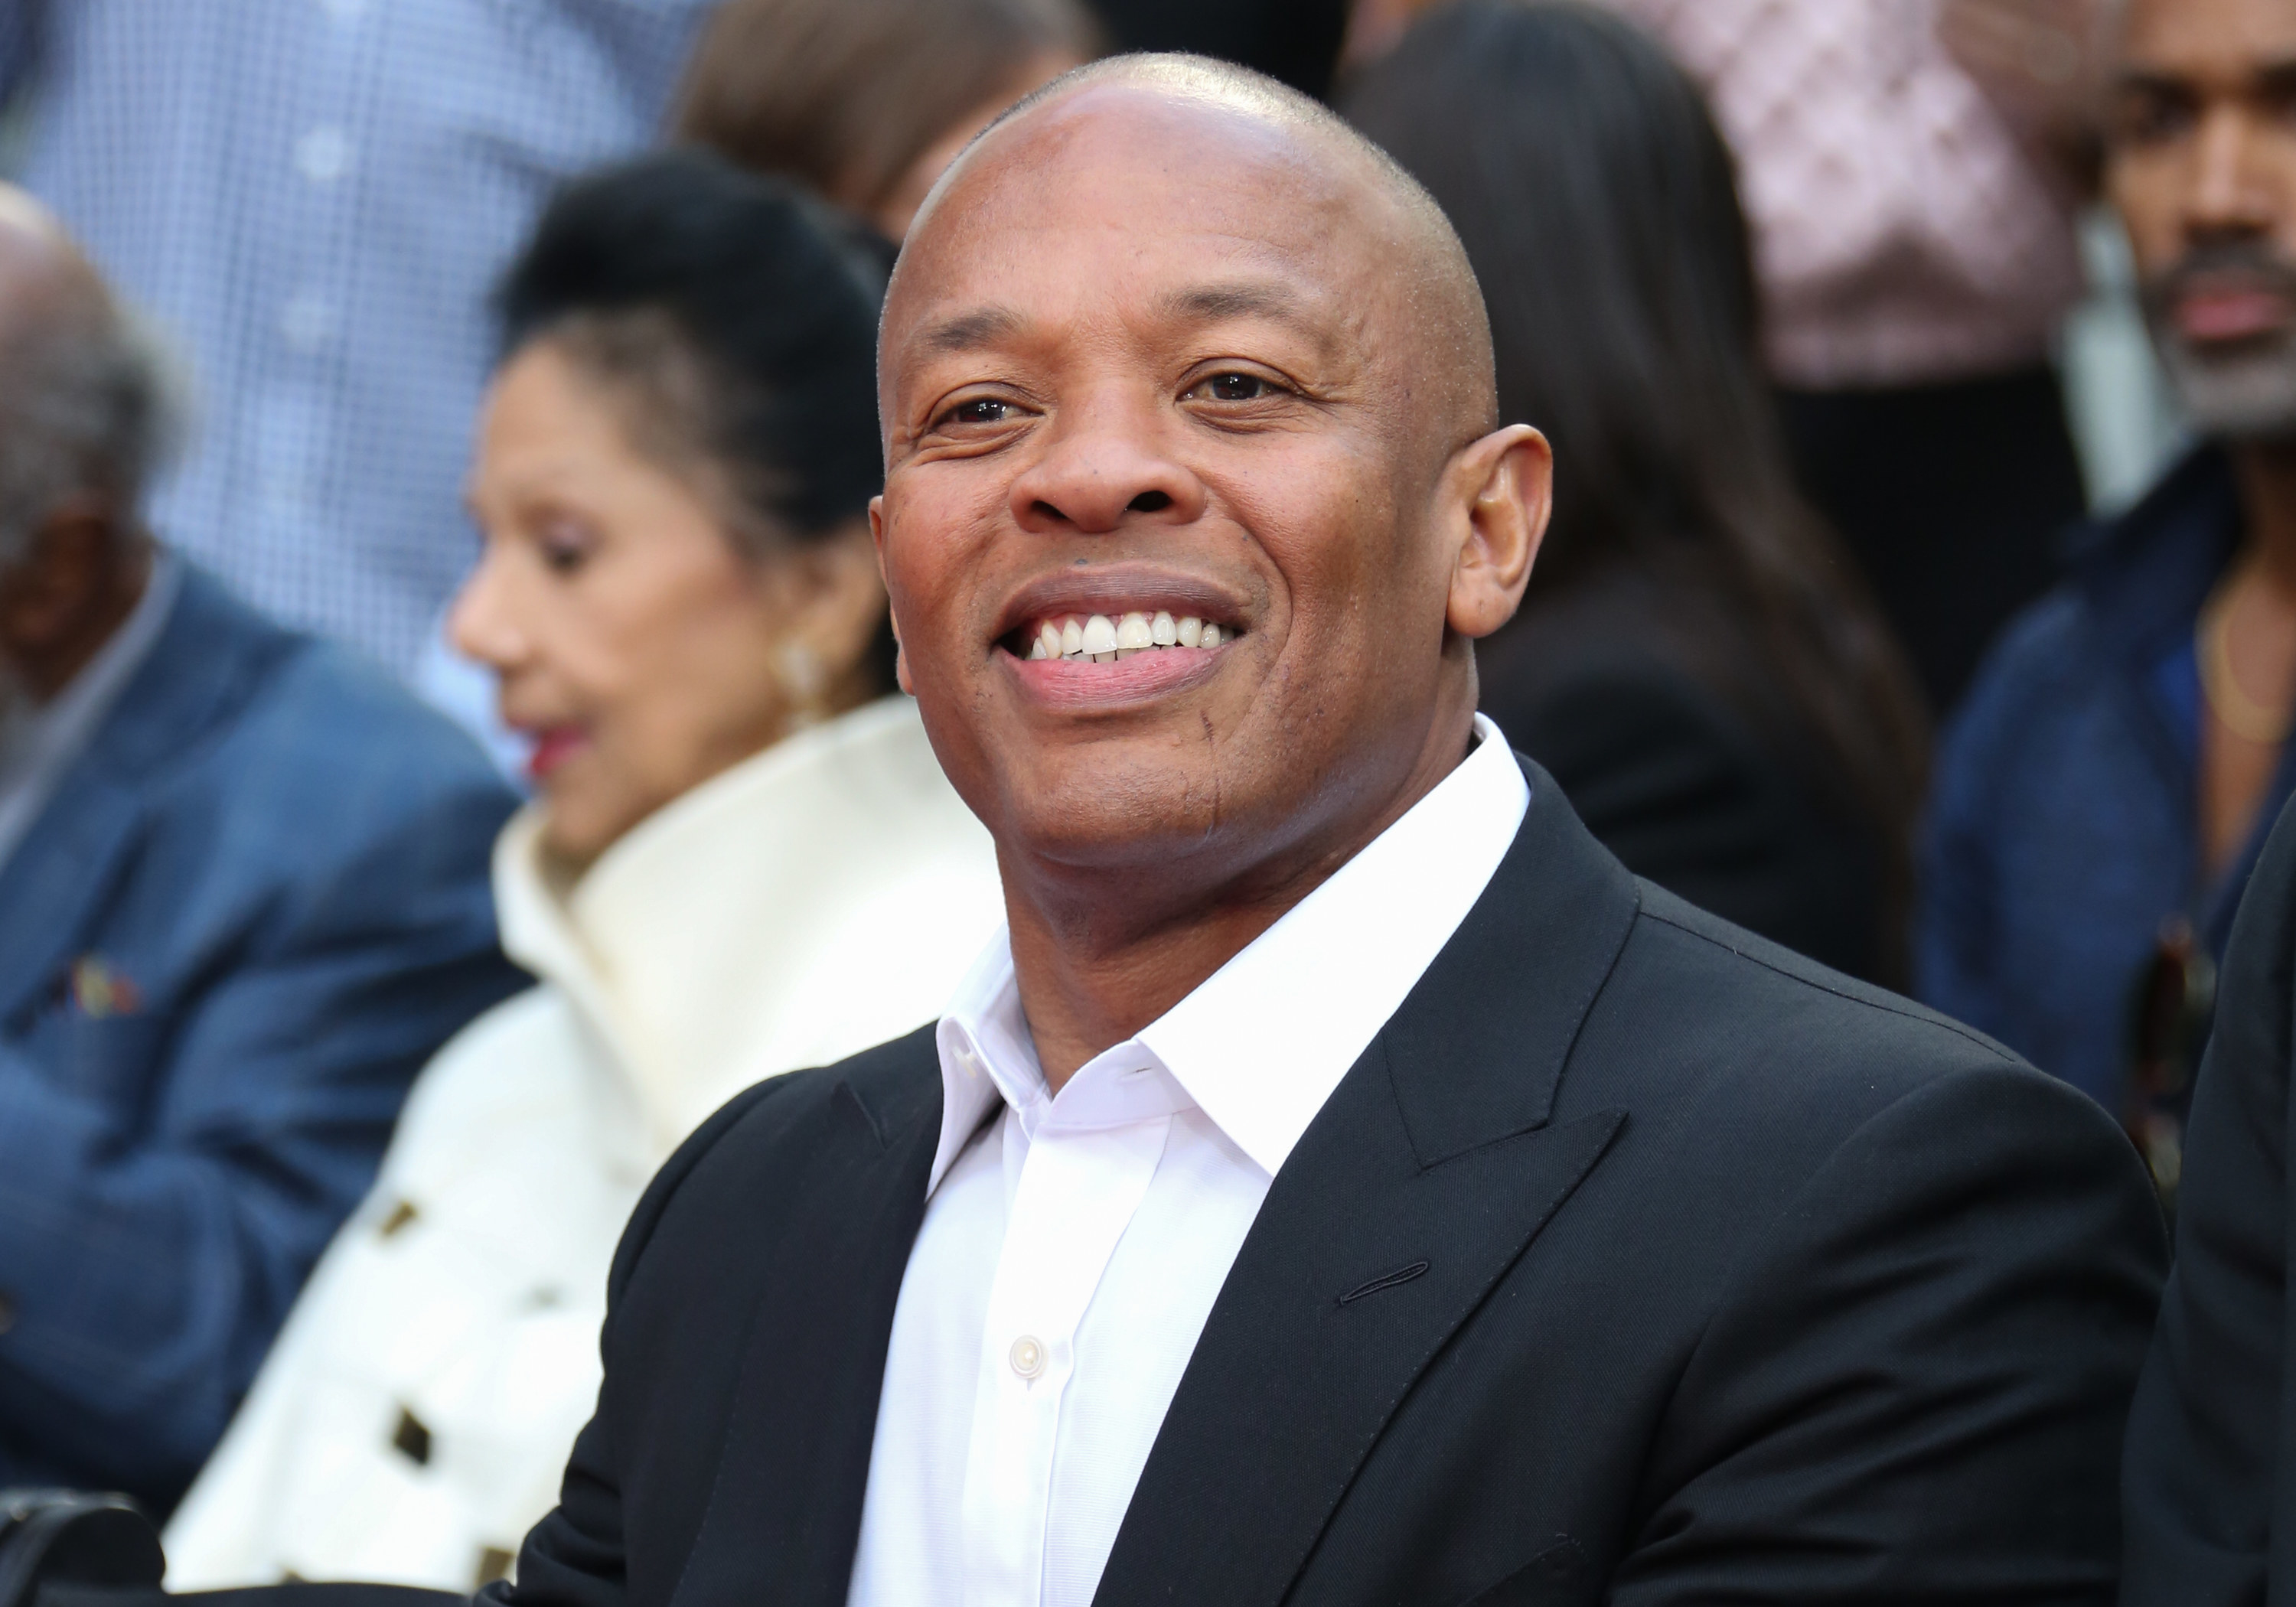 Dr. Dre attends the Quincy Jones Hand and Footprint ceremony 